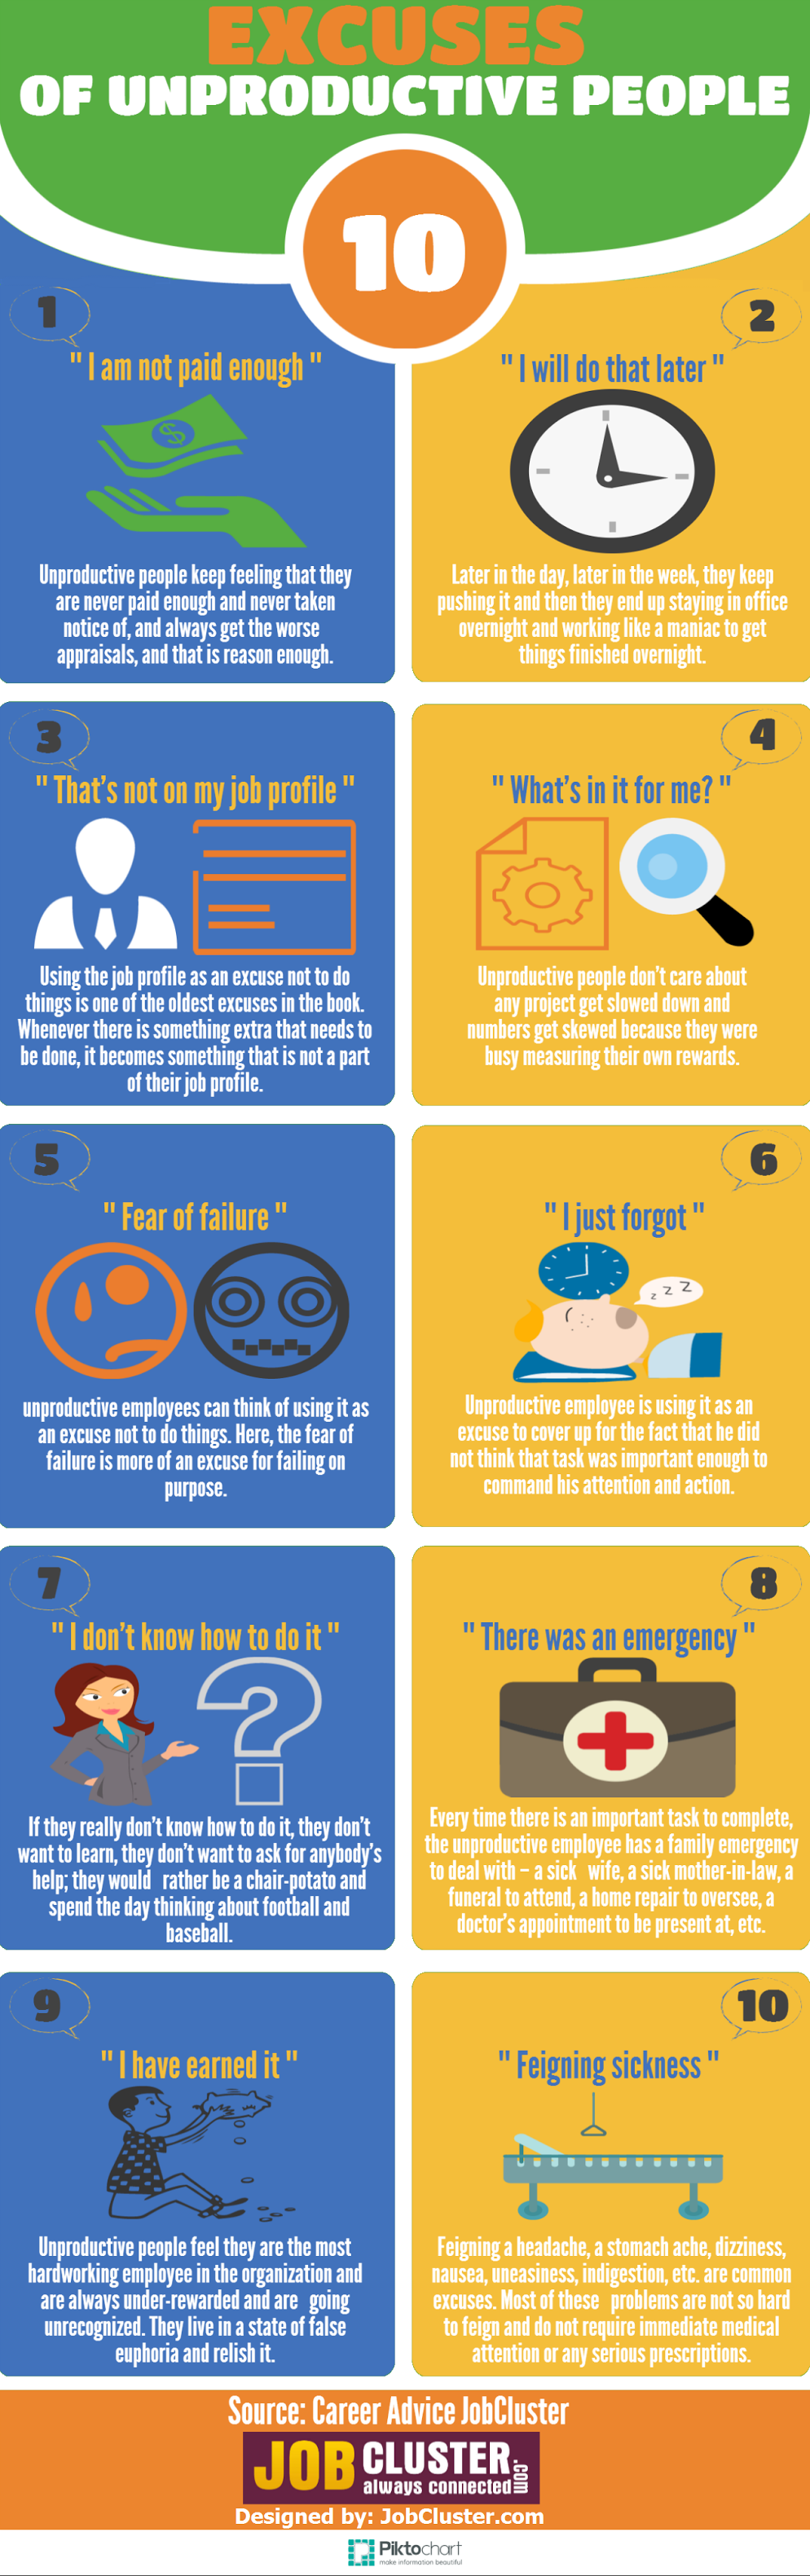 10 Excuses of Unproductive People #infographic